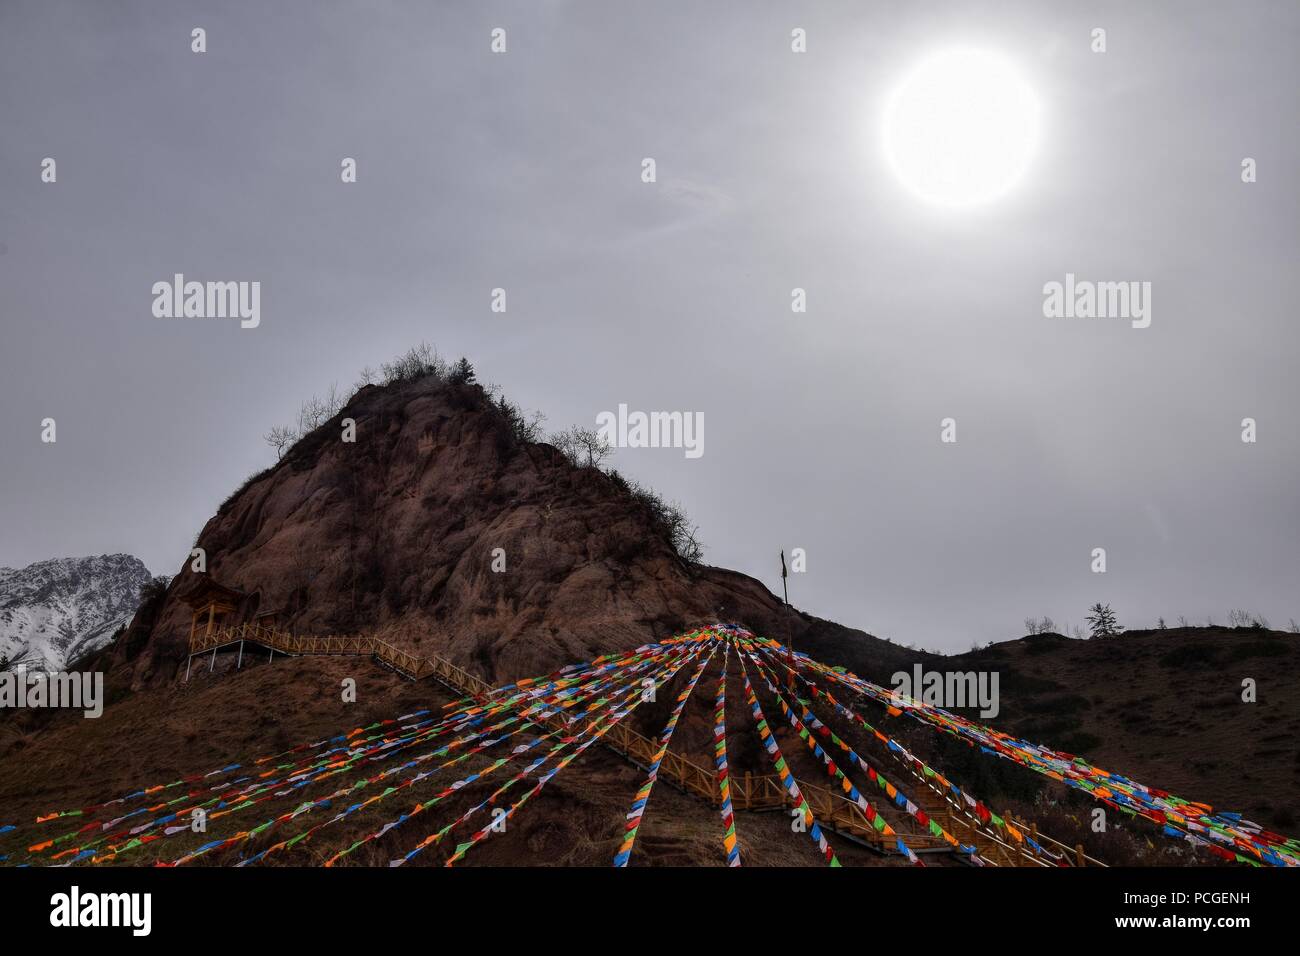 Mati Temple in Gansu province in China and the prayer flags fluttering in the foreground. Stock Photo